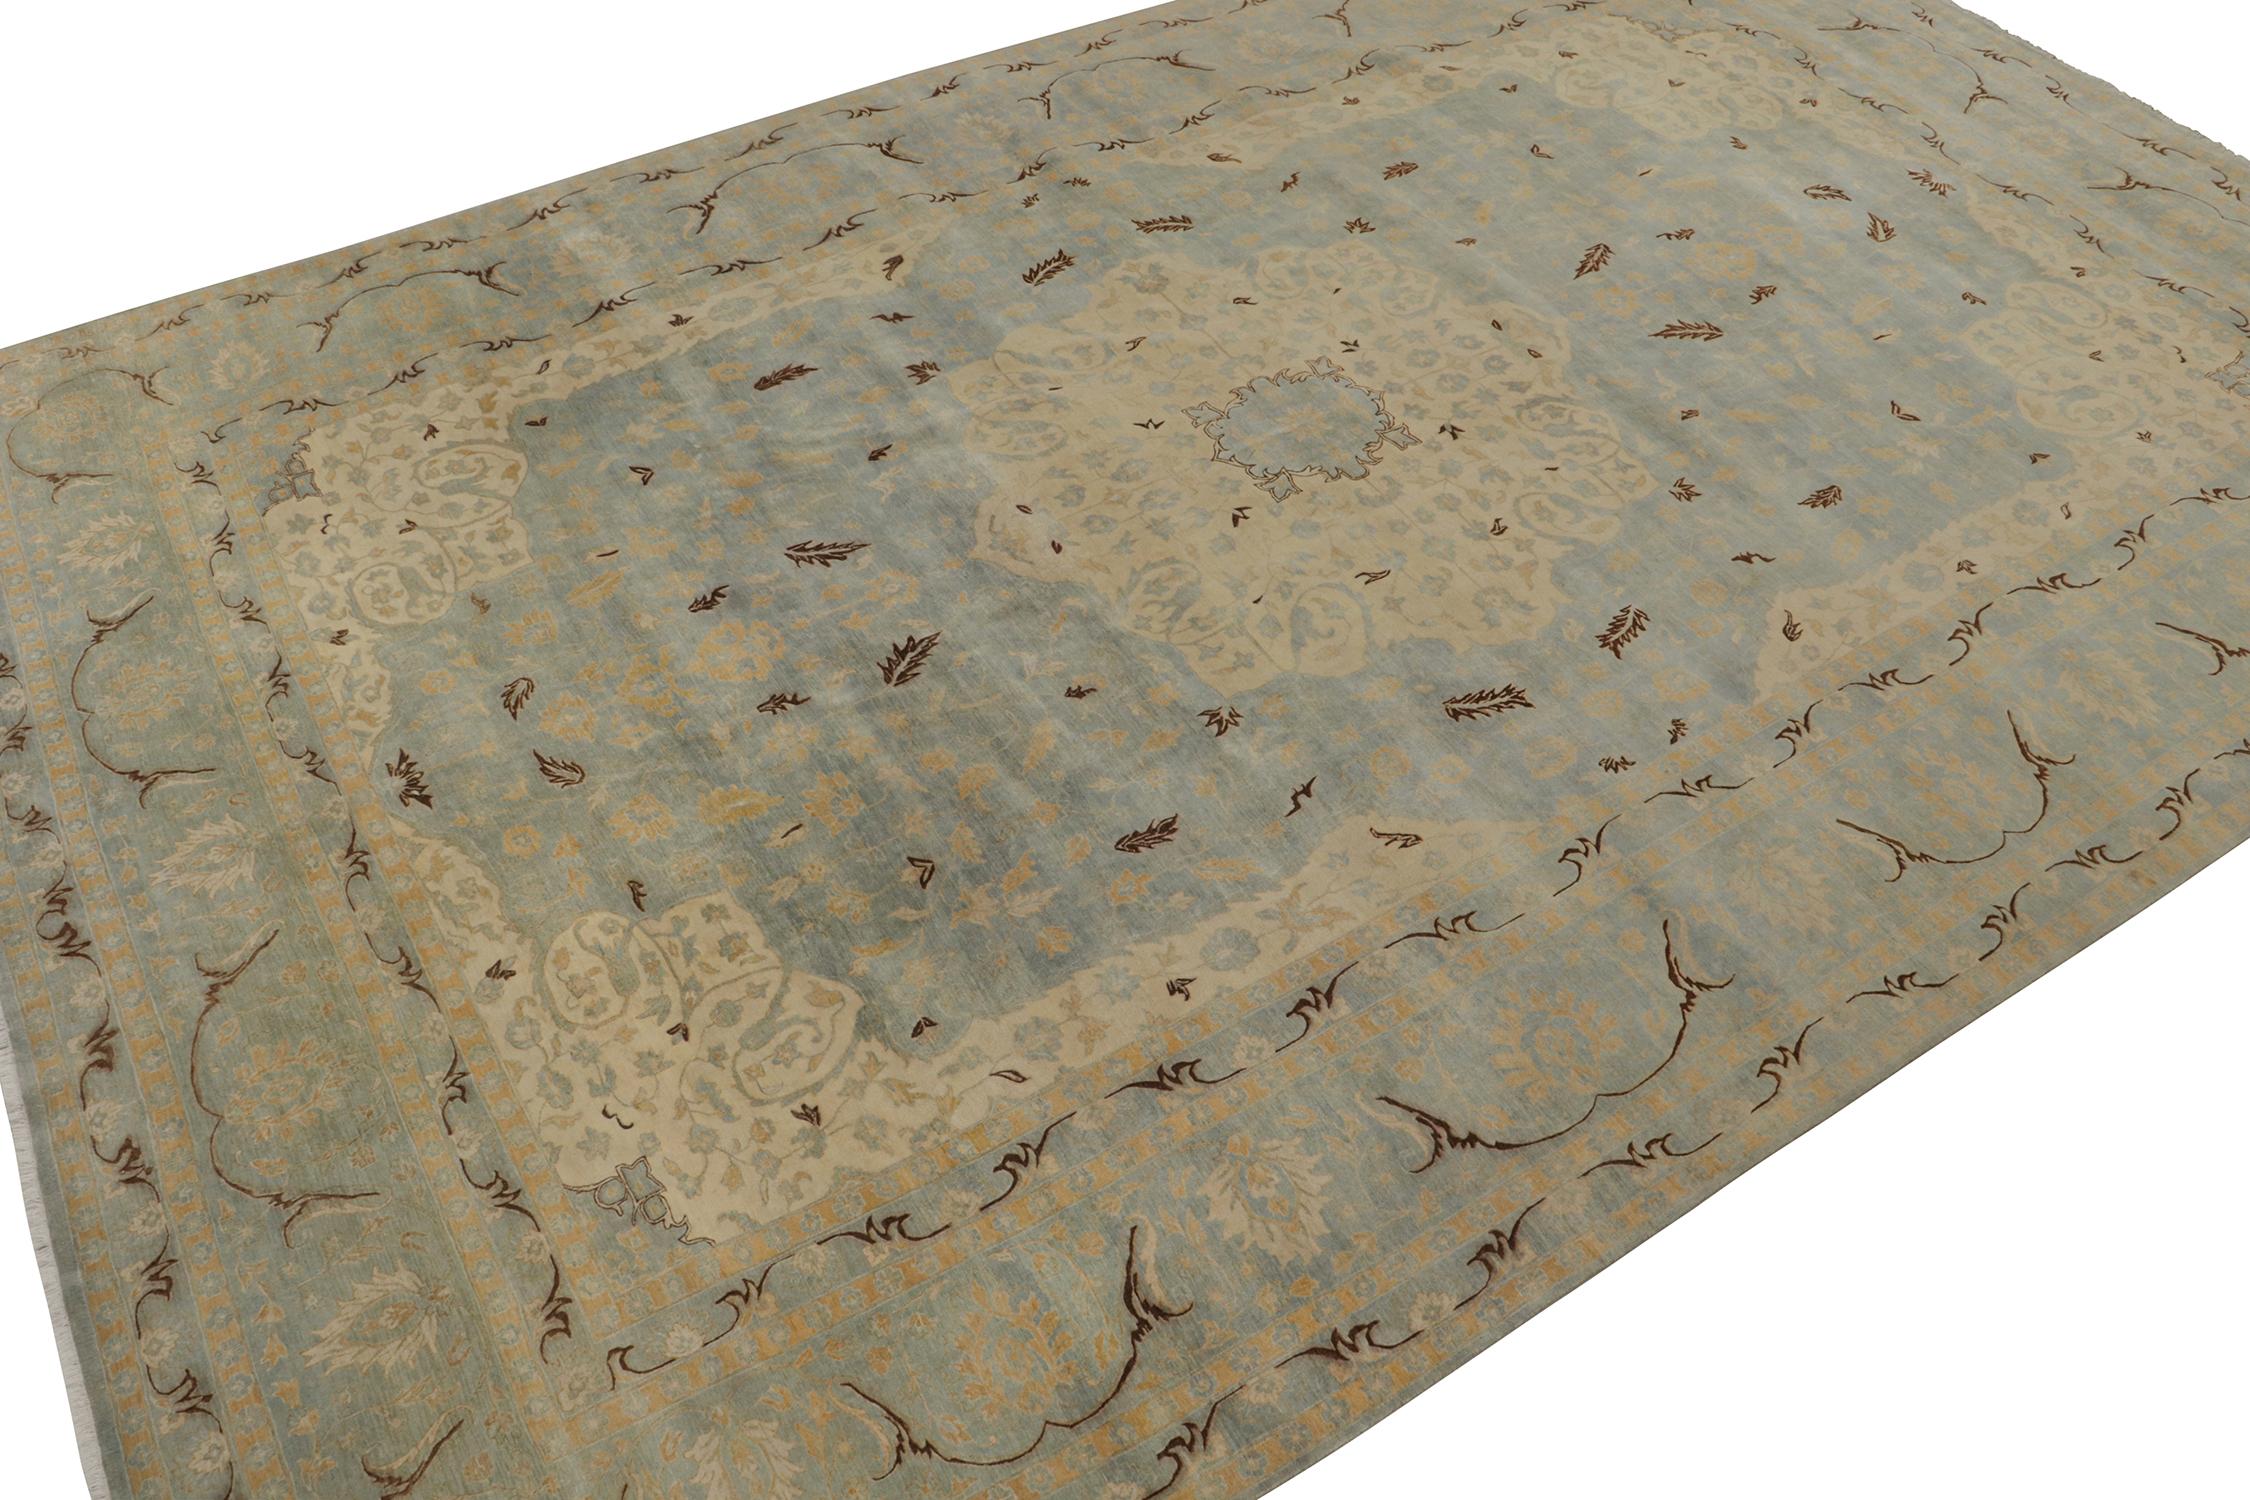 Tabriz Rug & Kilim’s Persian Style Rug in Blue, Beige-Brown and Gold Floral Pattern For Sale